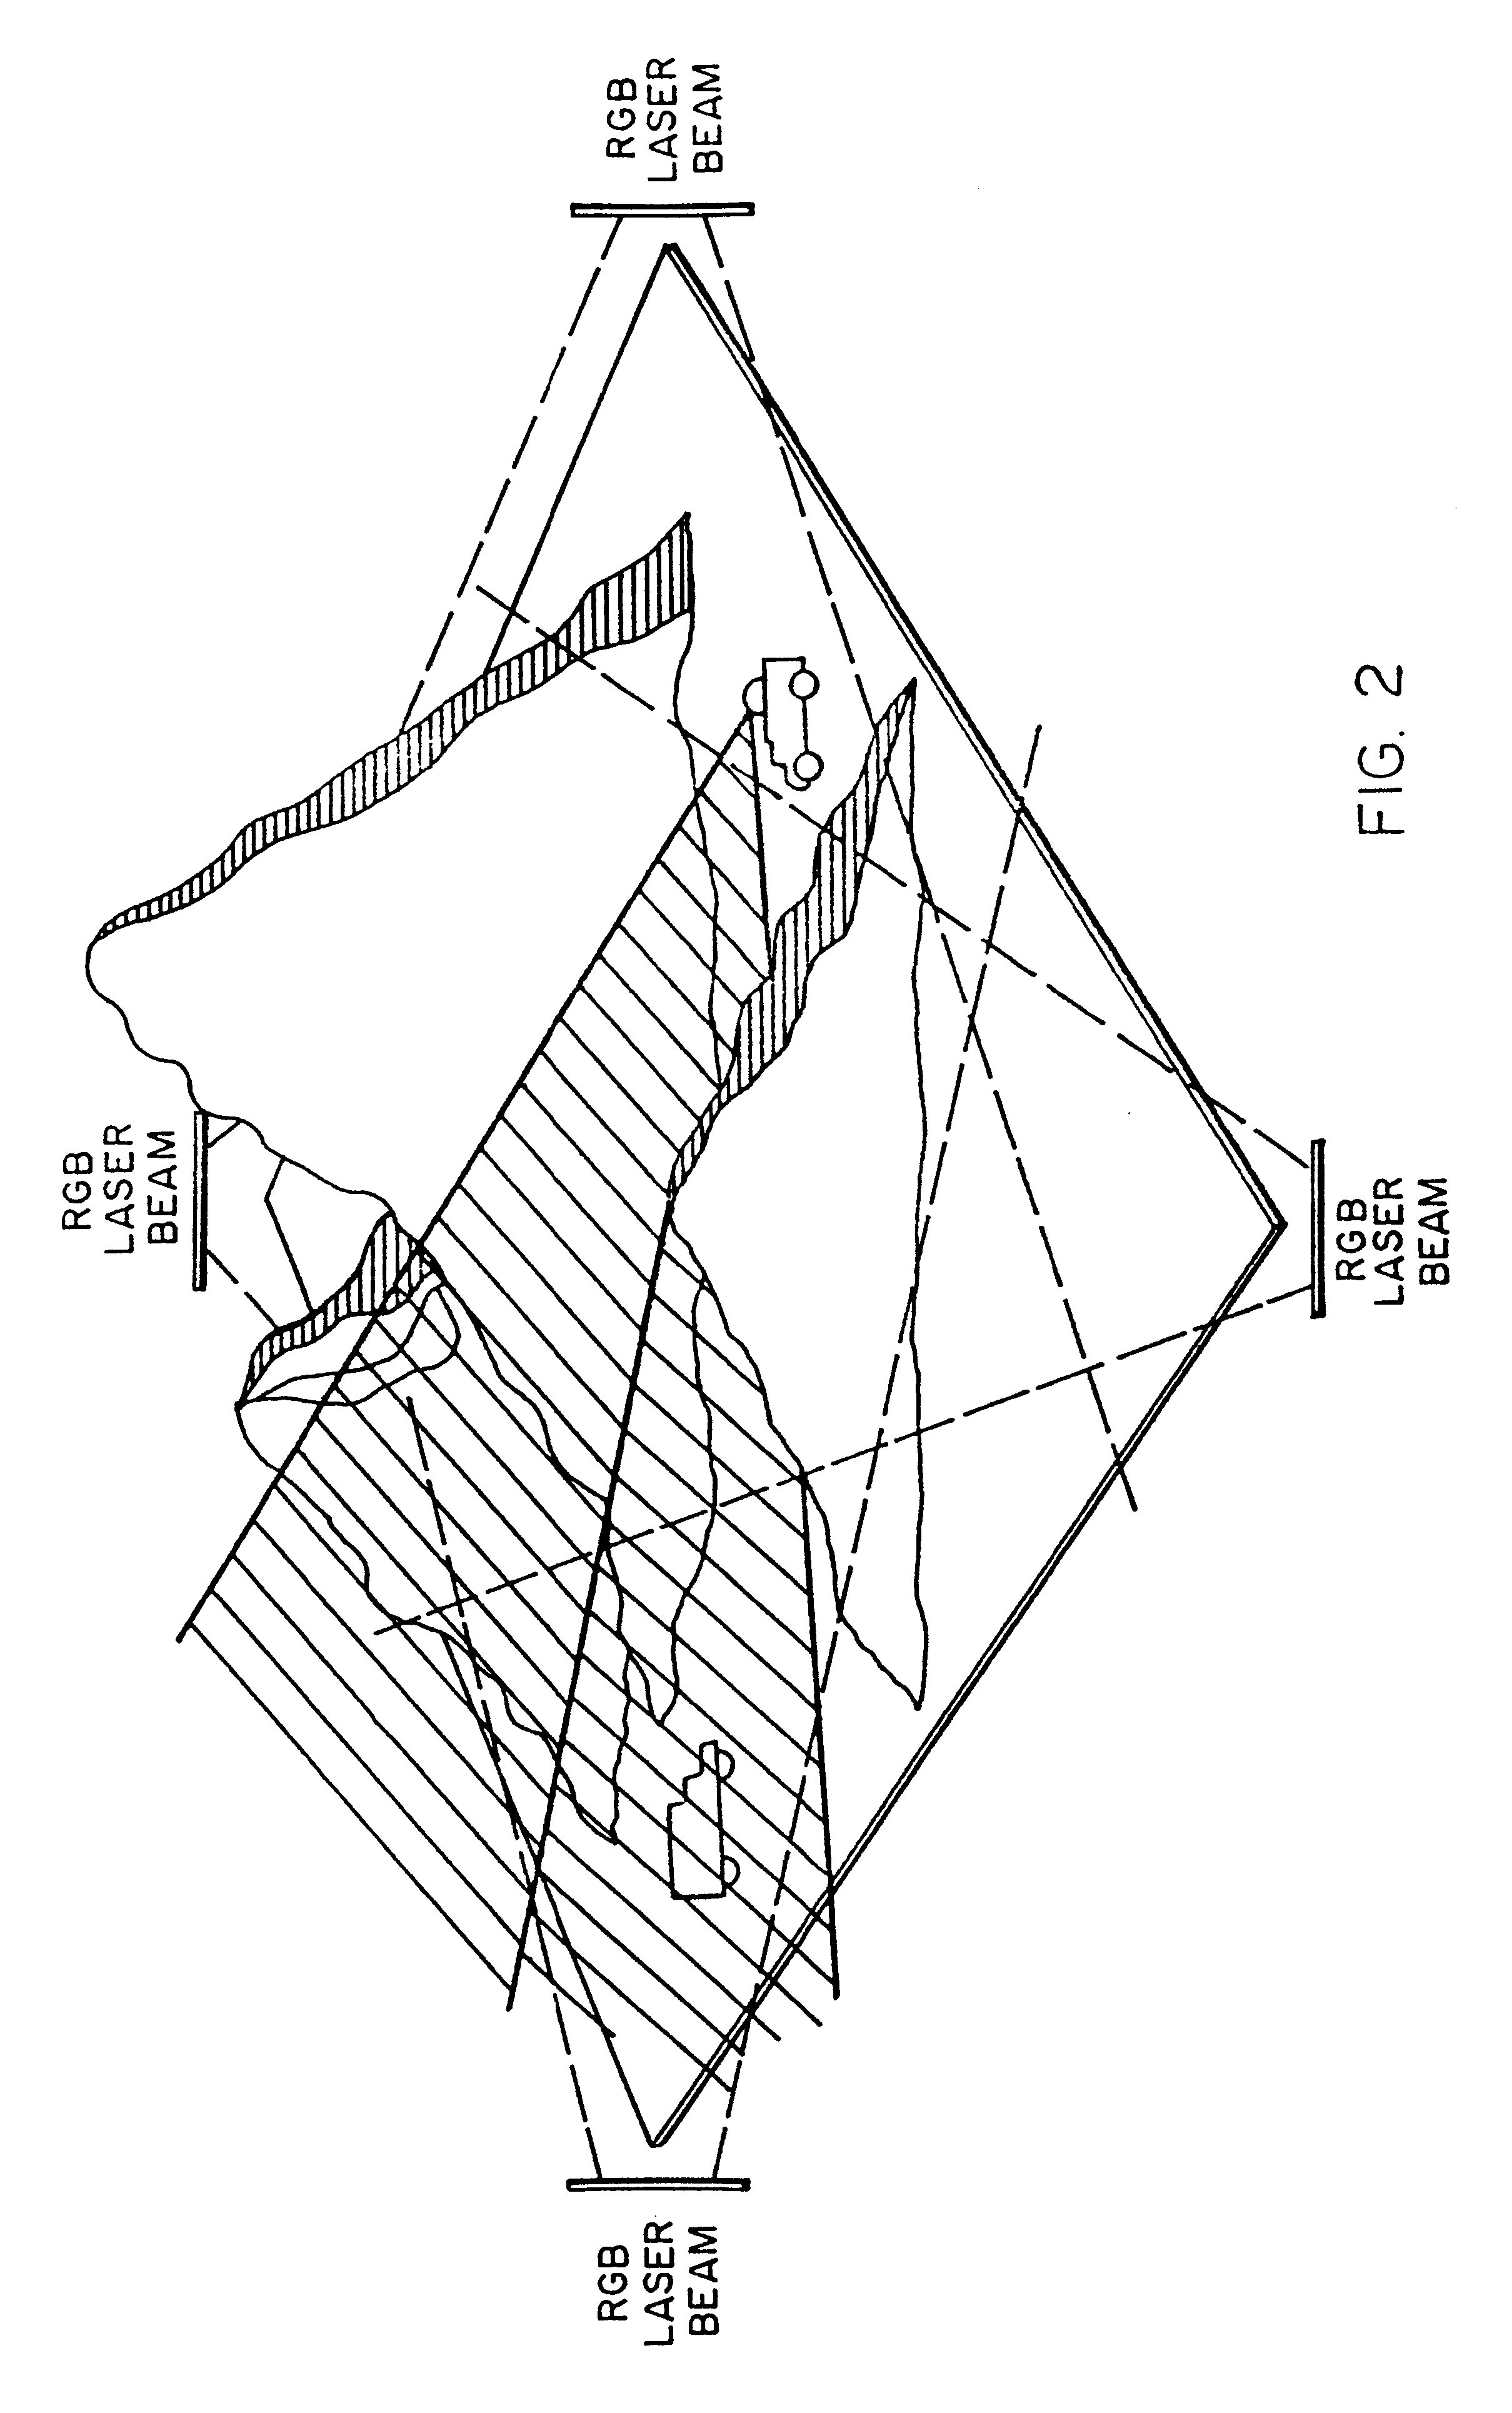 High-resolution large-field-of-view three-dimensional hologram display system and method thereof